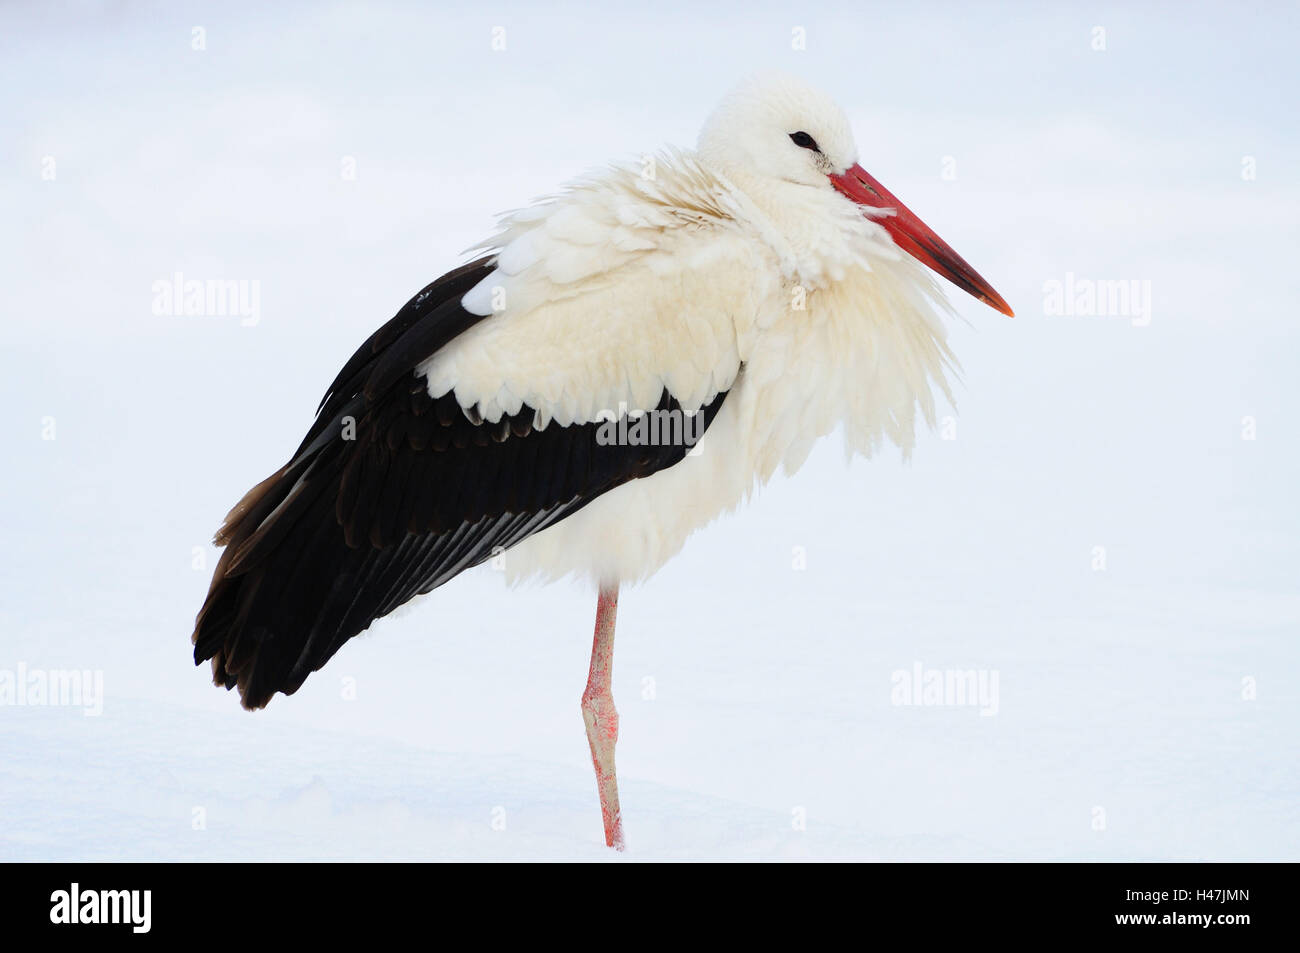 White stork, Ciconia ciconia, snow, side view, stand, Stock Photo